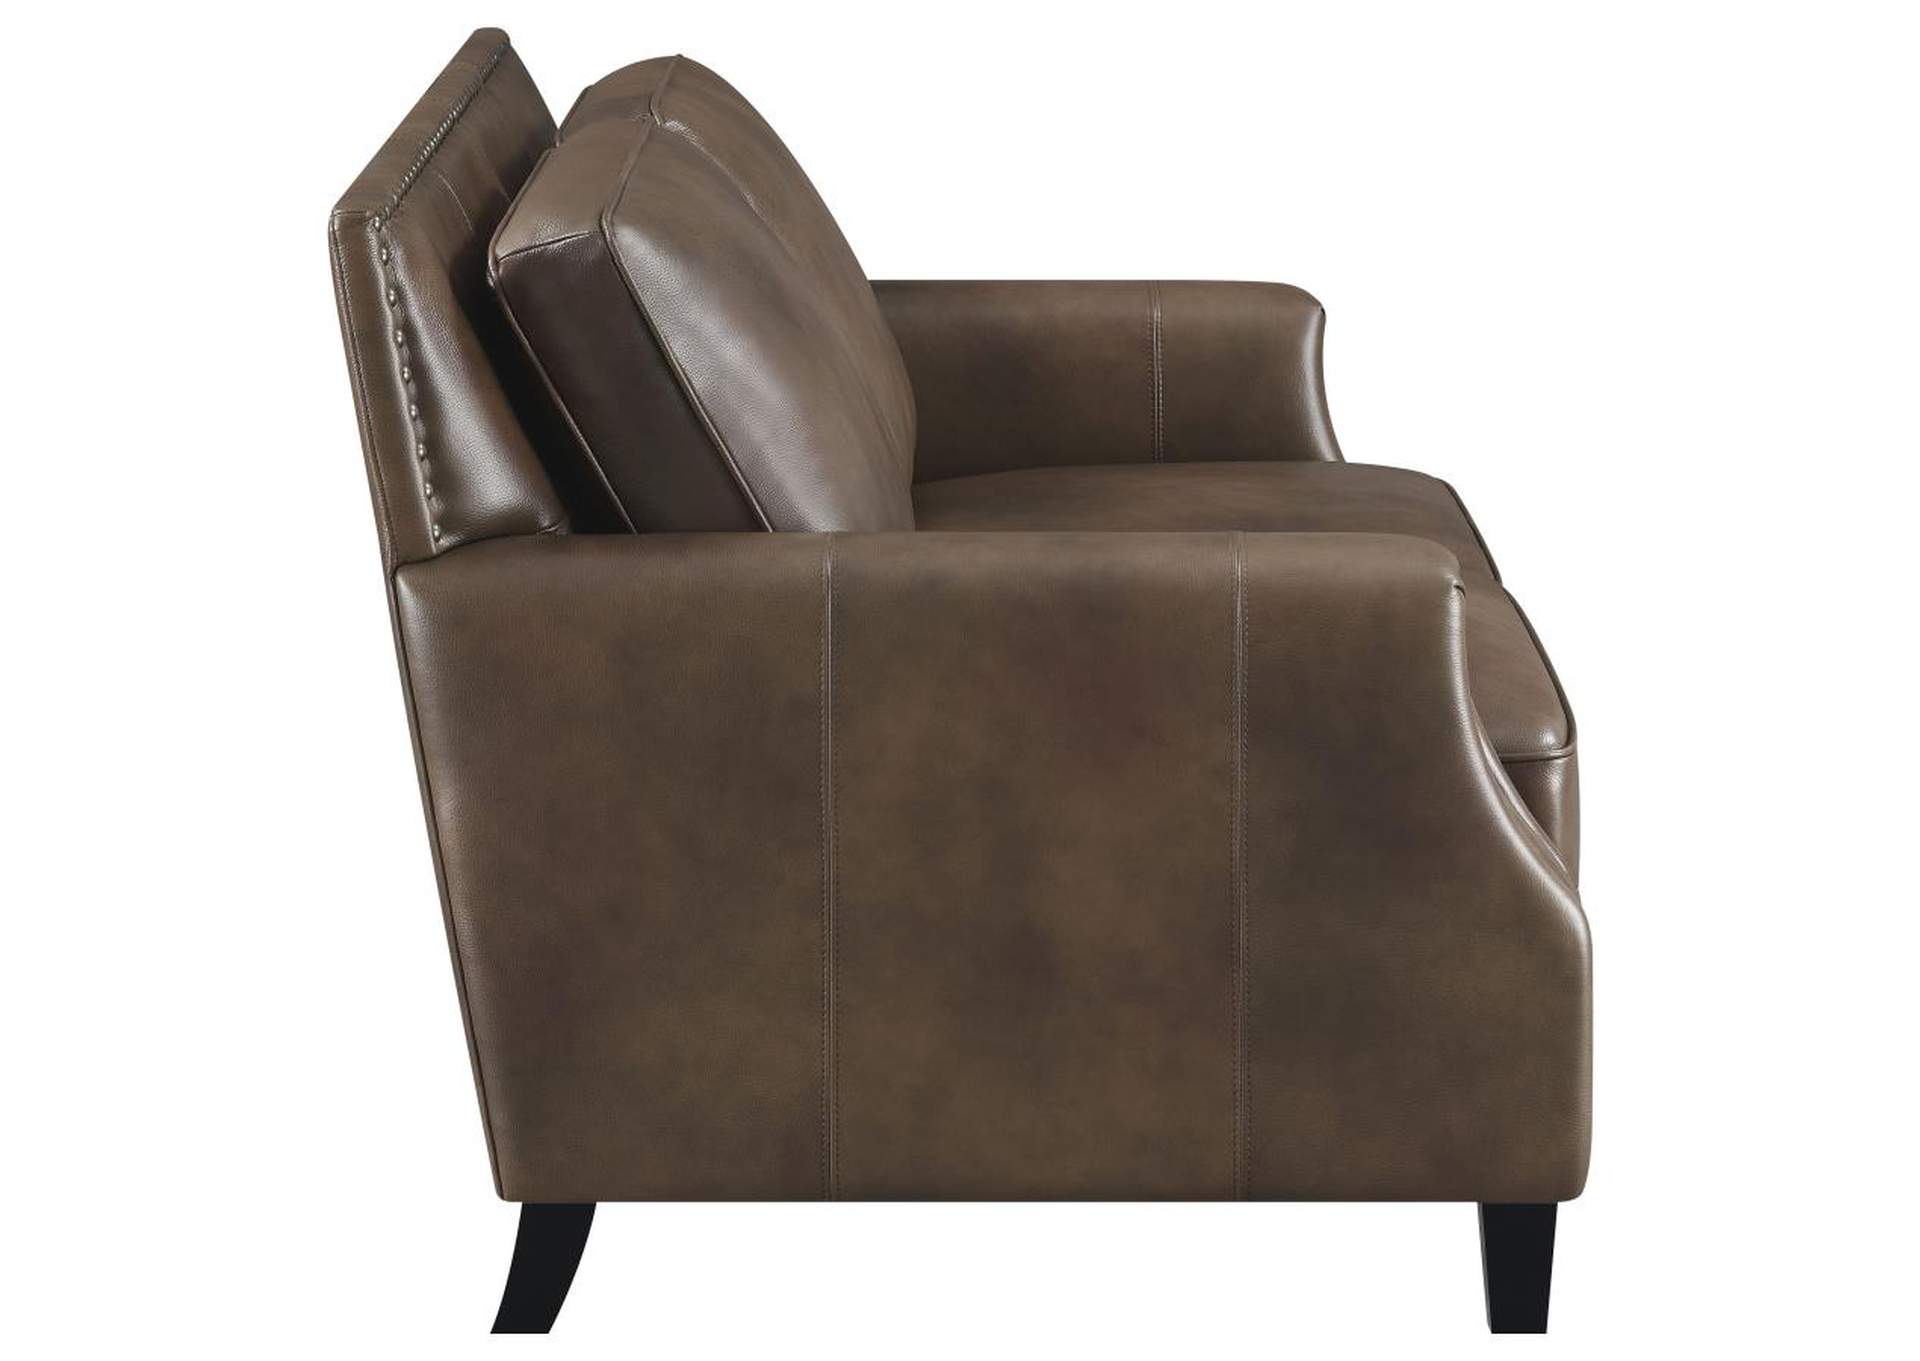 Leaton Upholstered Recessed Arms Loveseat Brown Sugar,Coaster Furniture